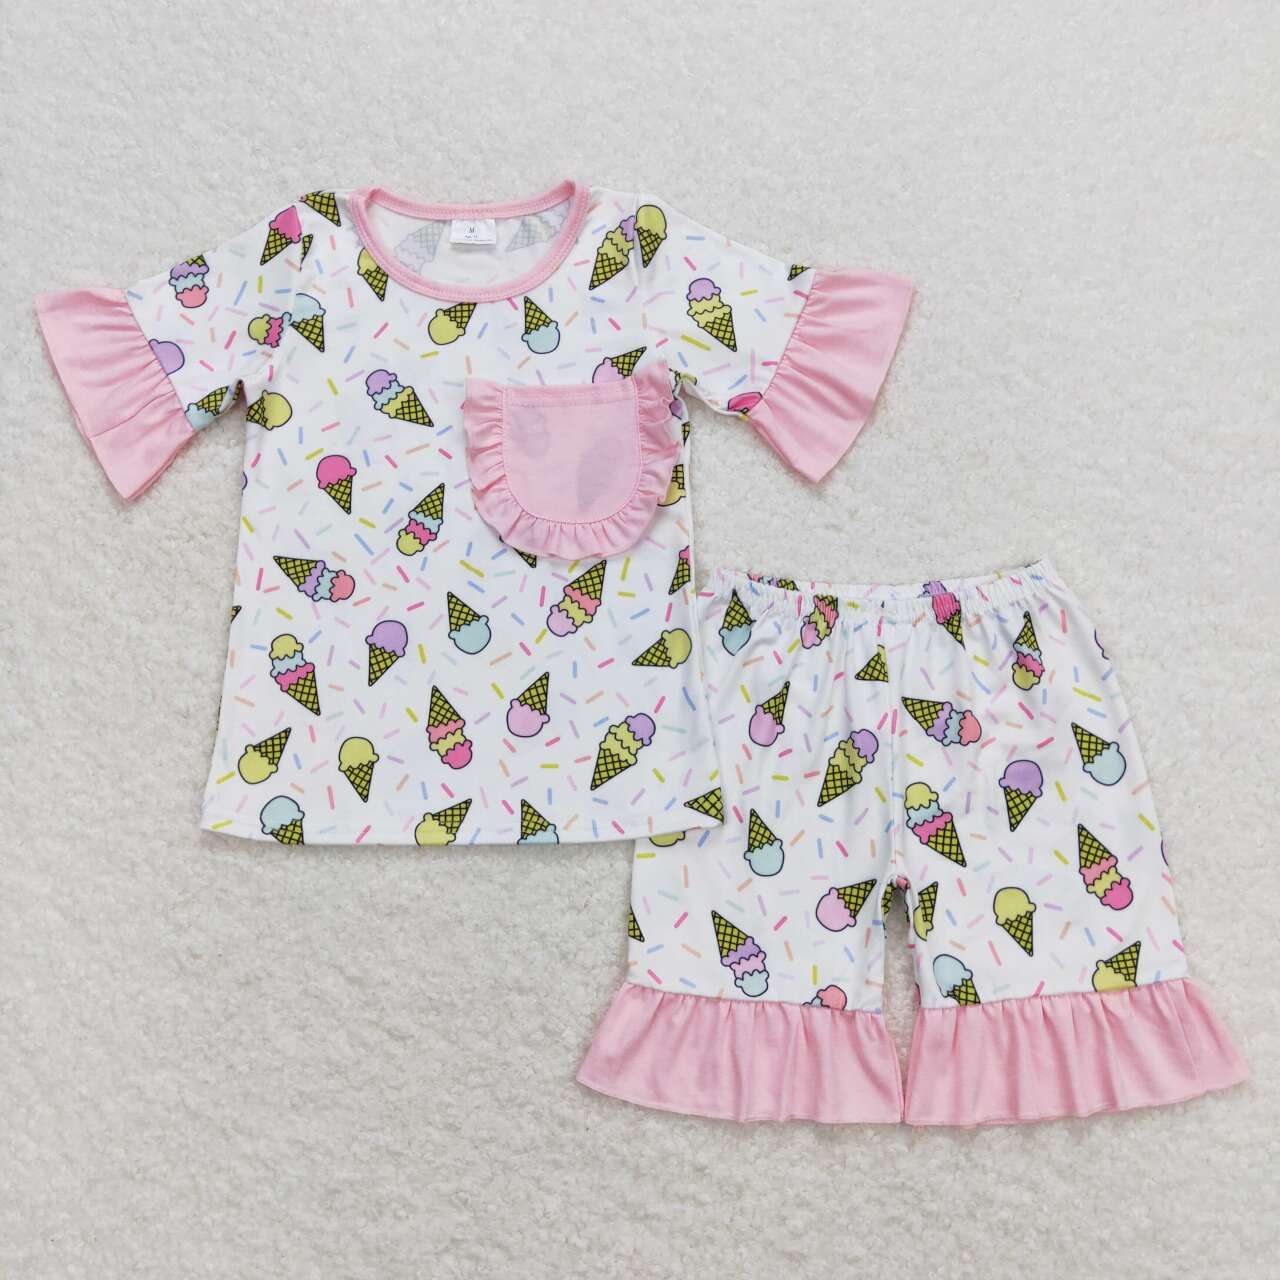 GSSO0667 Ice Cone Popsicle Print Pocket Girls Summer Pajamas Clothes Set